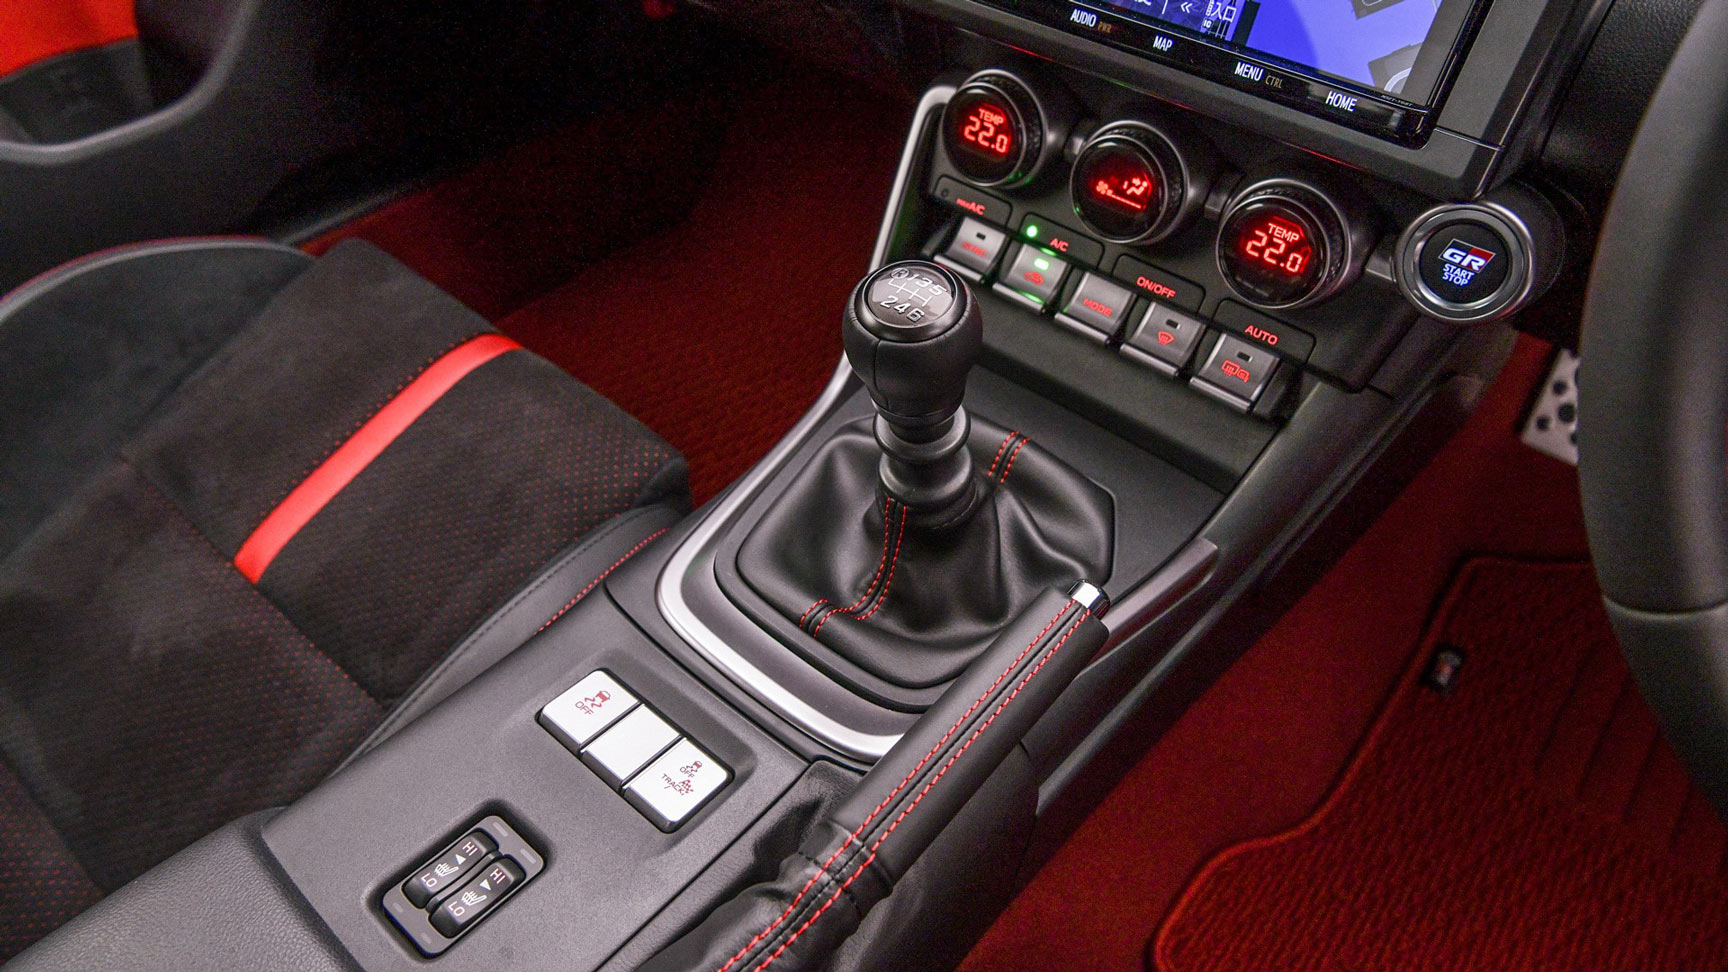 The Toyota 86 Center Console